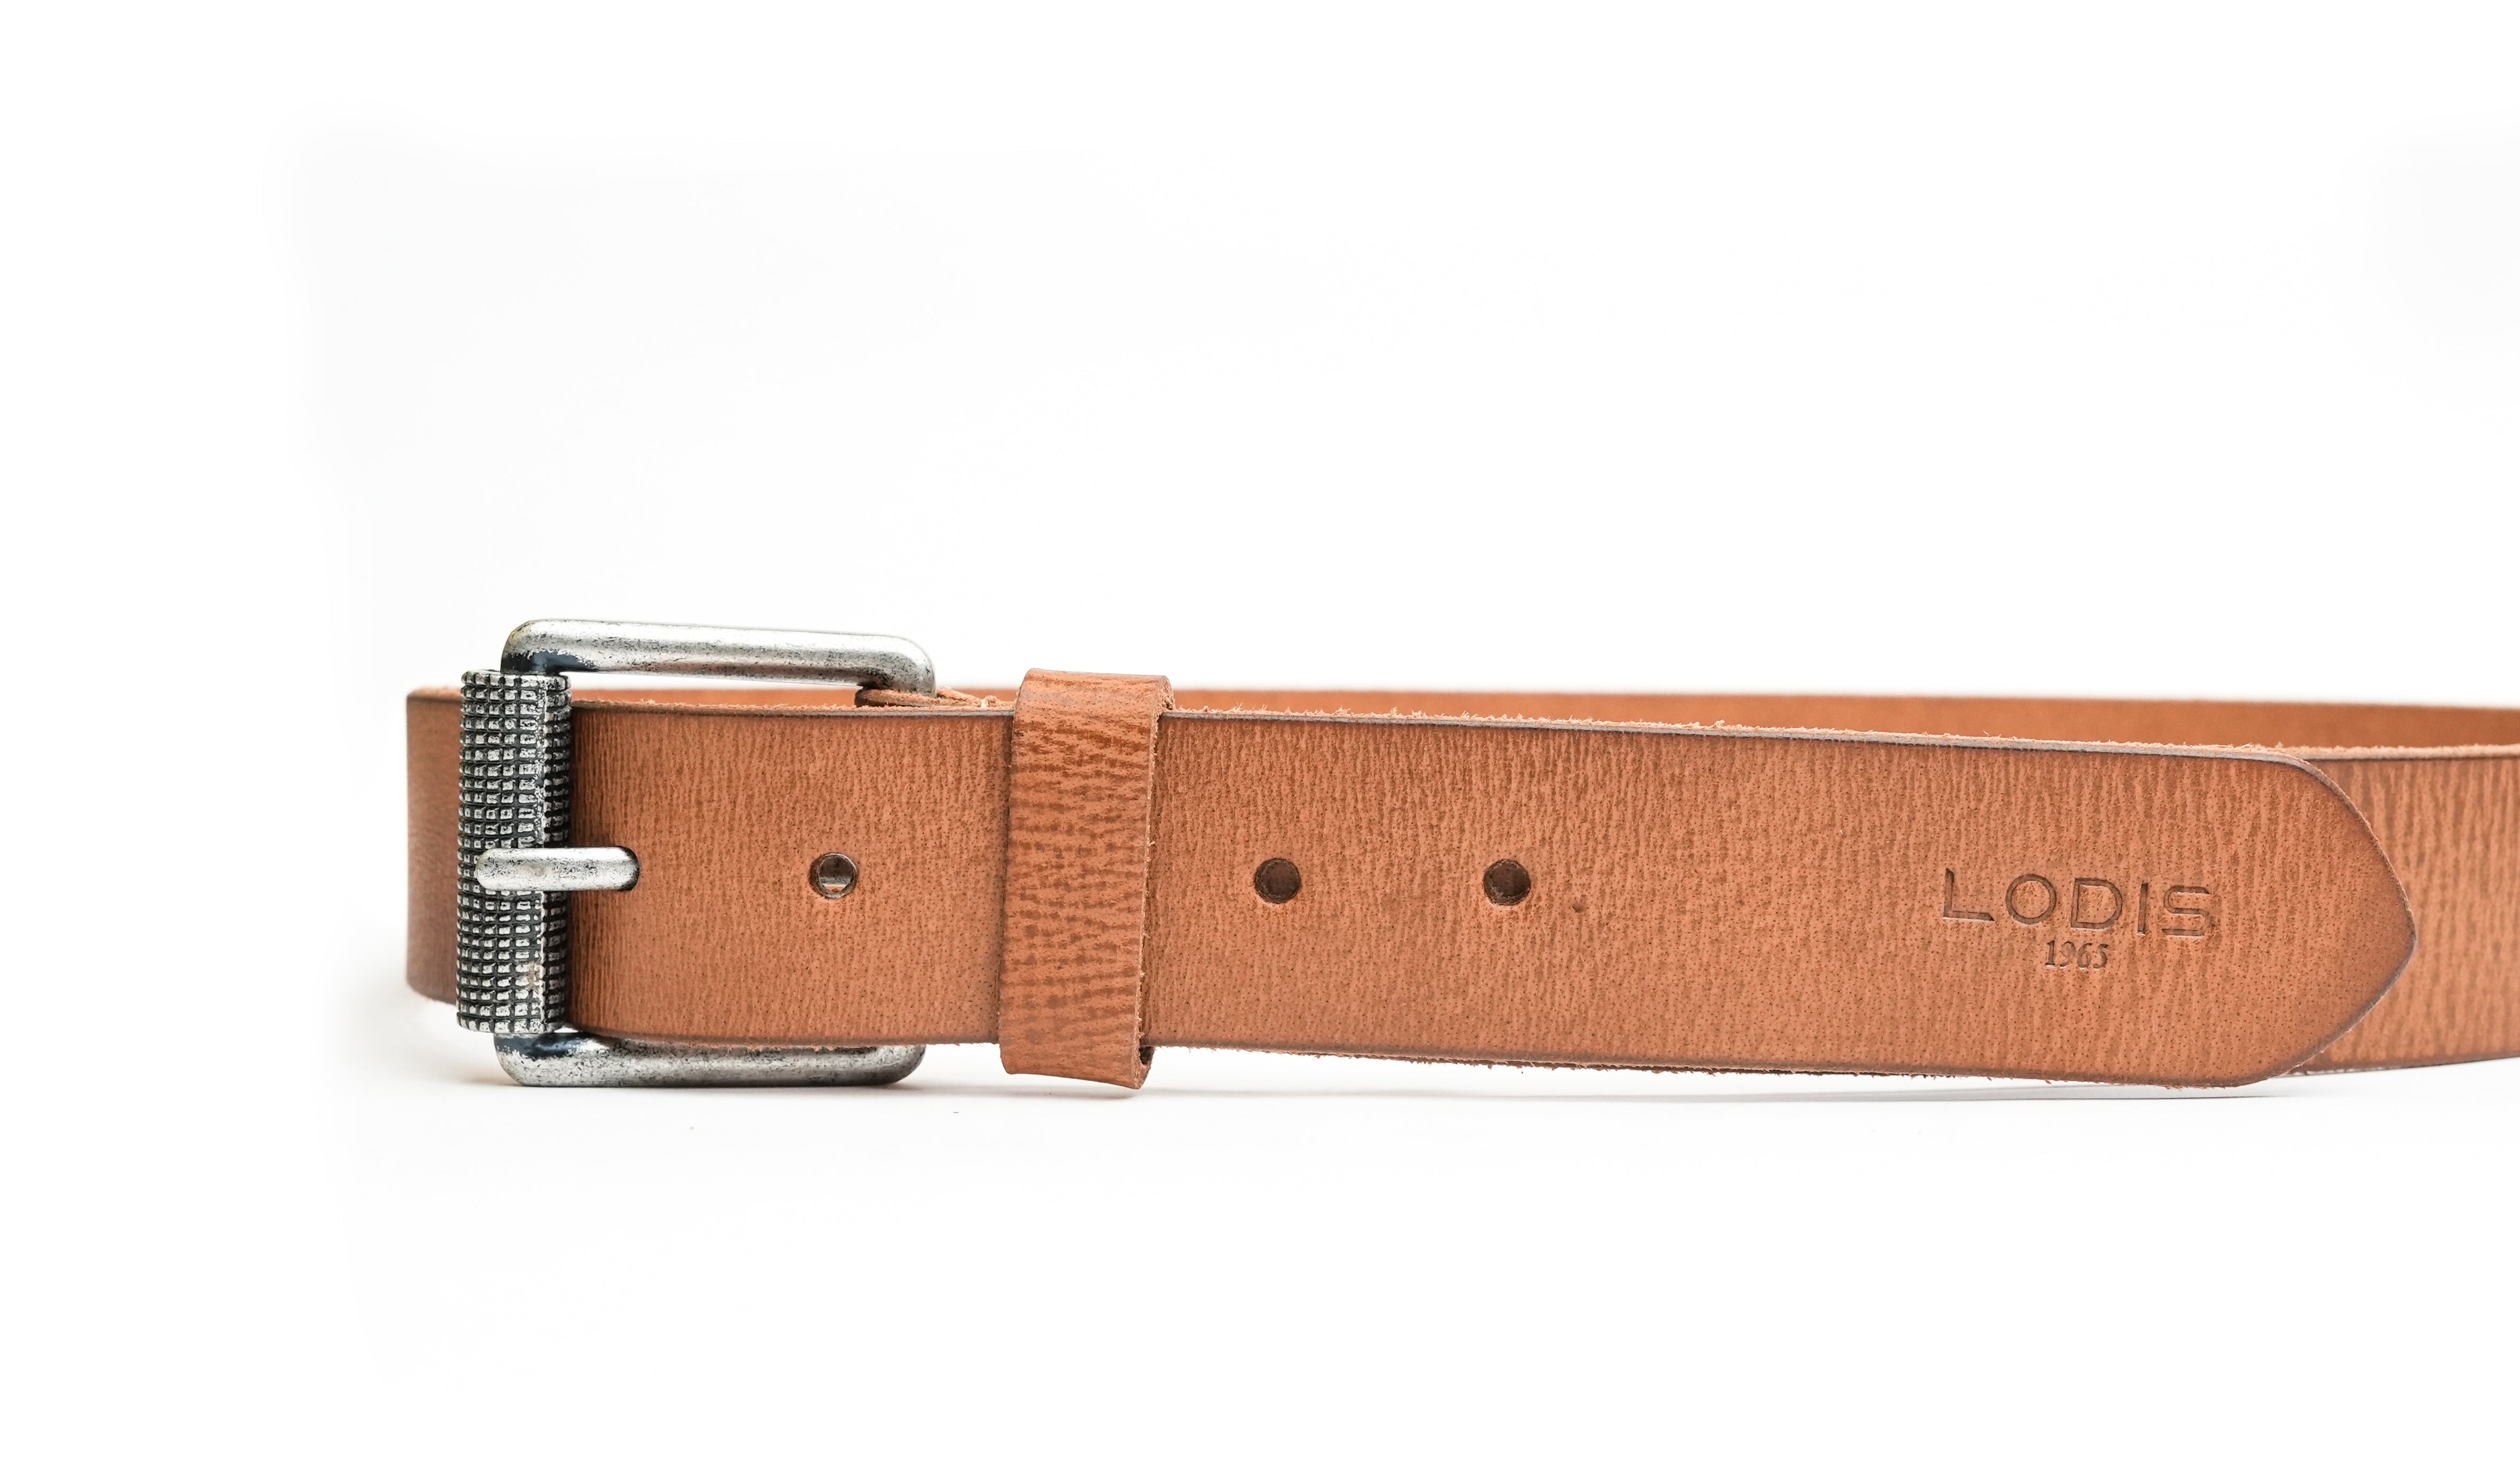 Buy Now and Upgrade Your Style by wearing Top Grain Leather Belt | Lodis